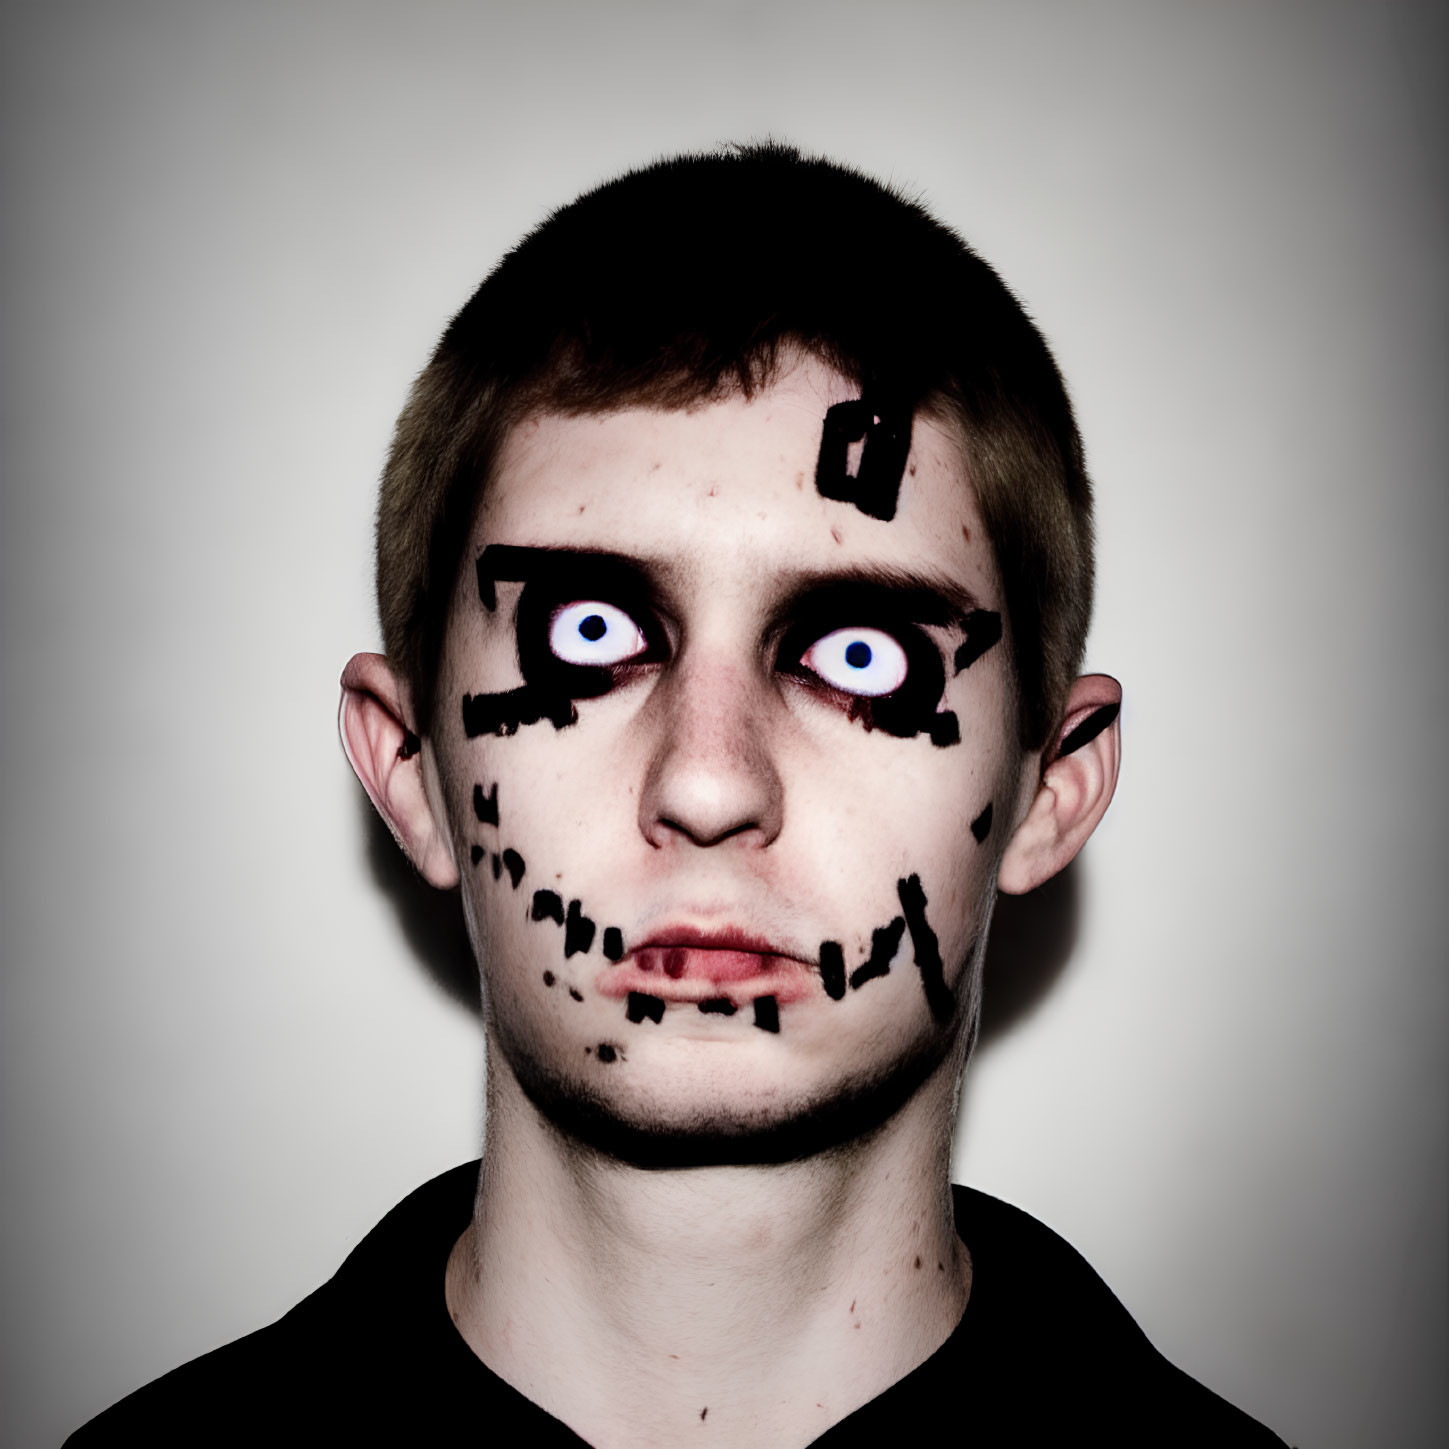 Person with face paint resembling cartoon character: exaggerated black lines, blue eyes